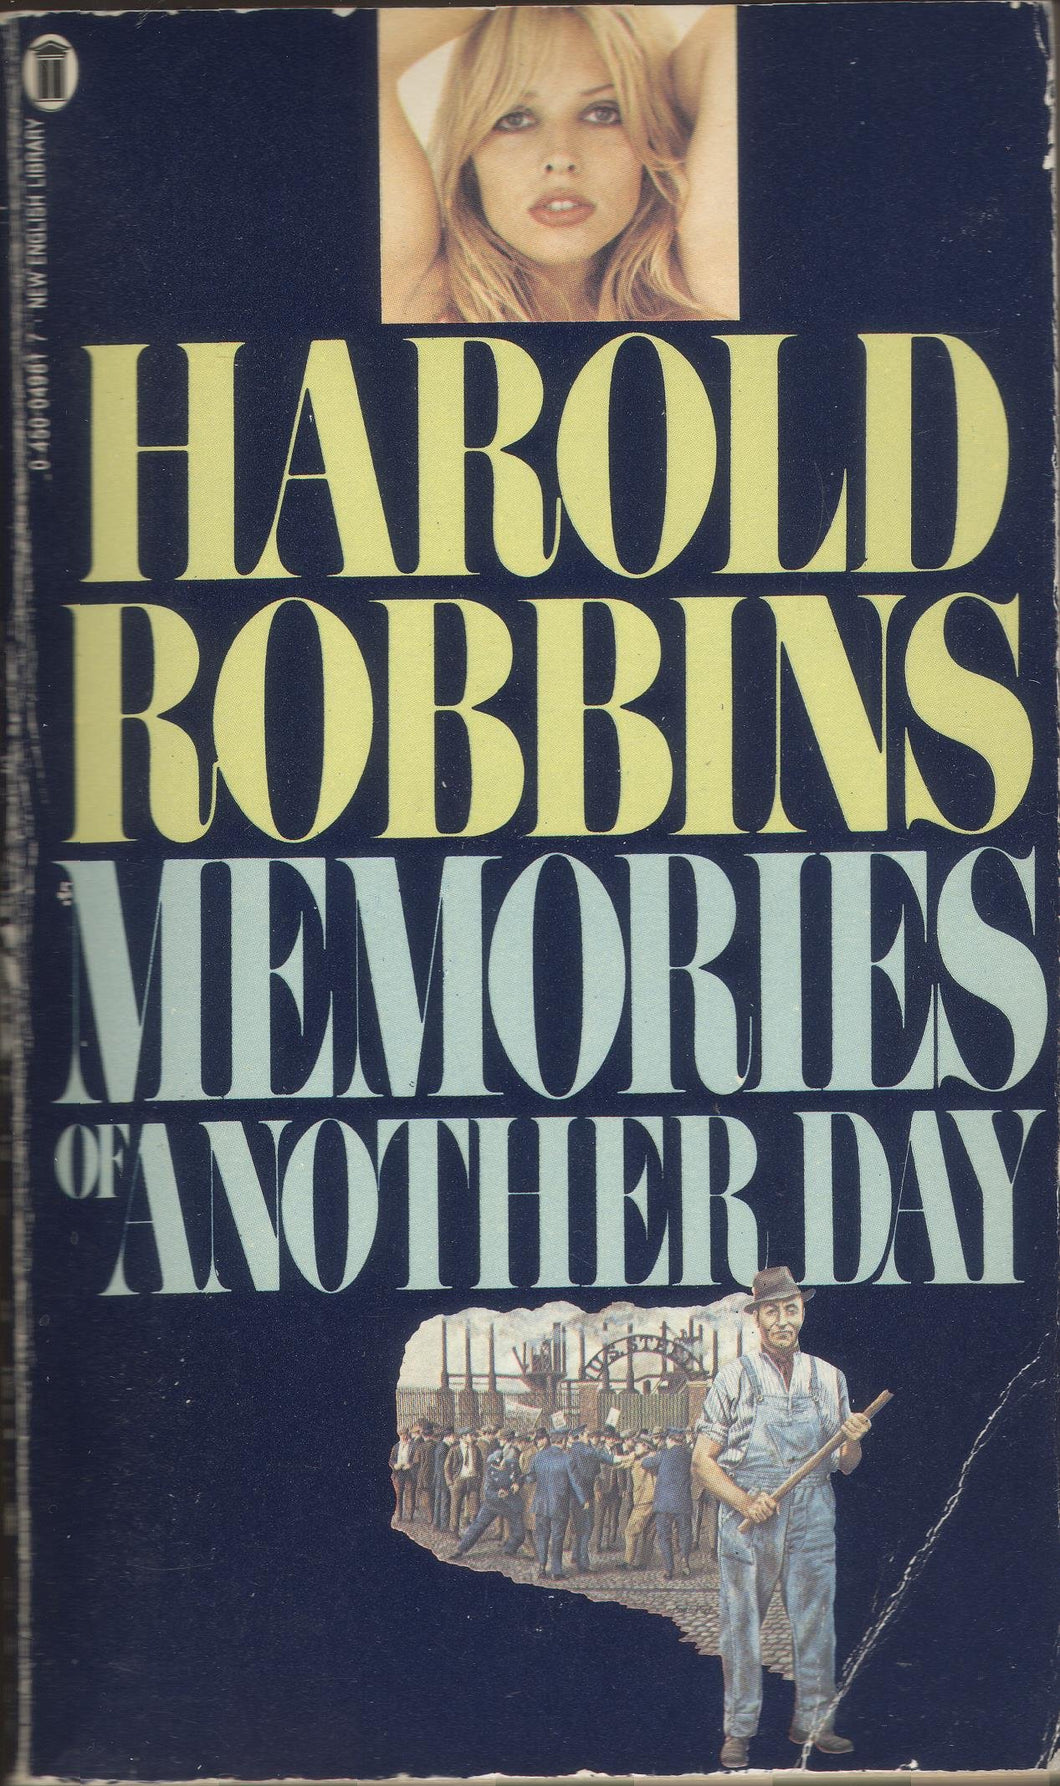 Memories of Another Day Robbins, Harold